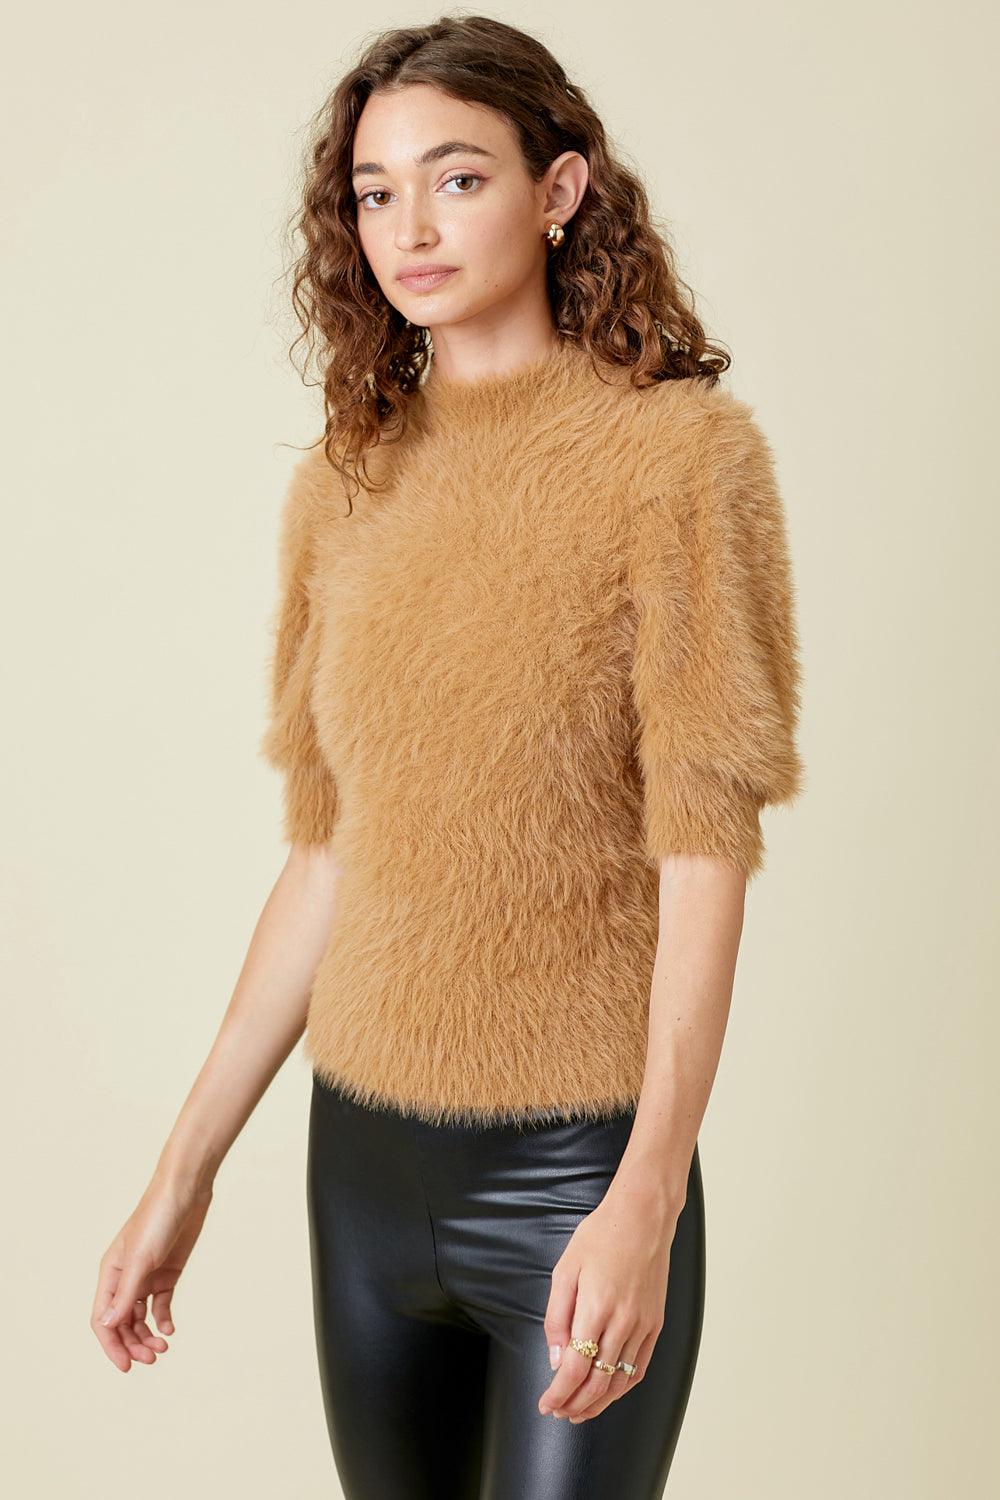 Camel Fur Puff Sleeve Sweater Top - Strawberry Moon Boutique